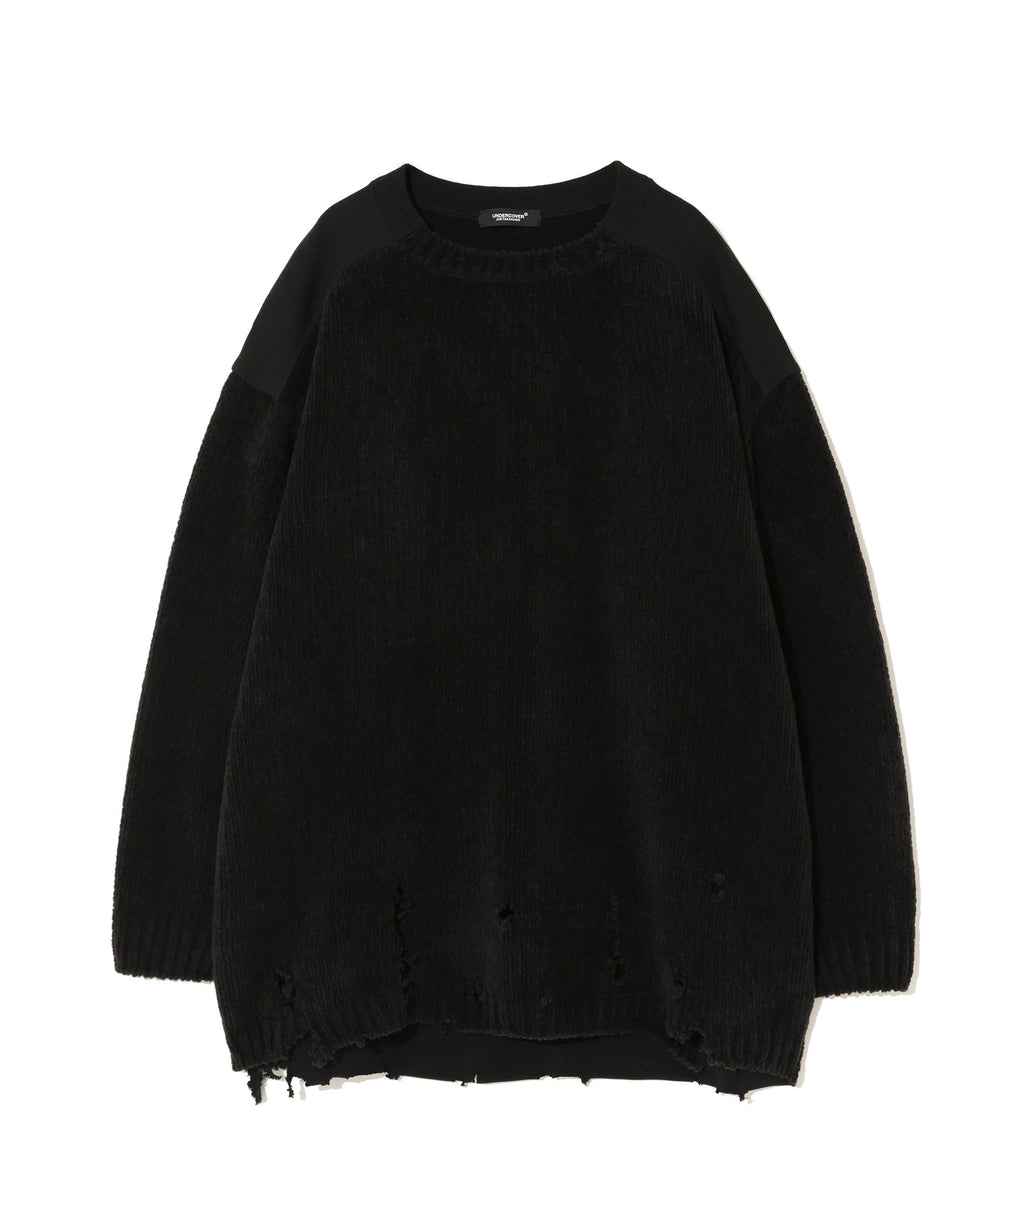 UNDERCOVER BLACK DECONSTRUCTED SWEATER